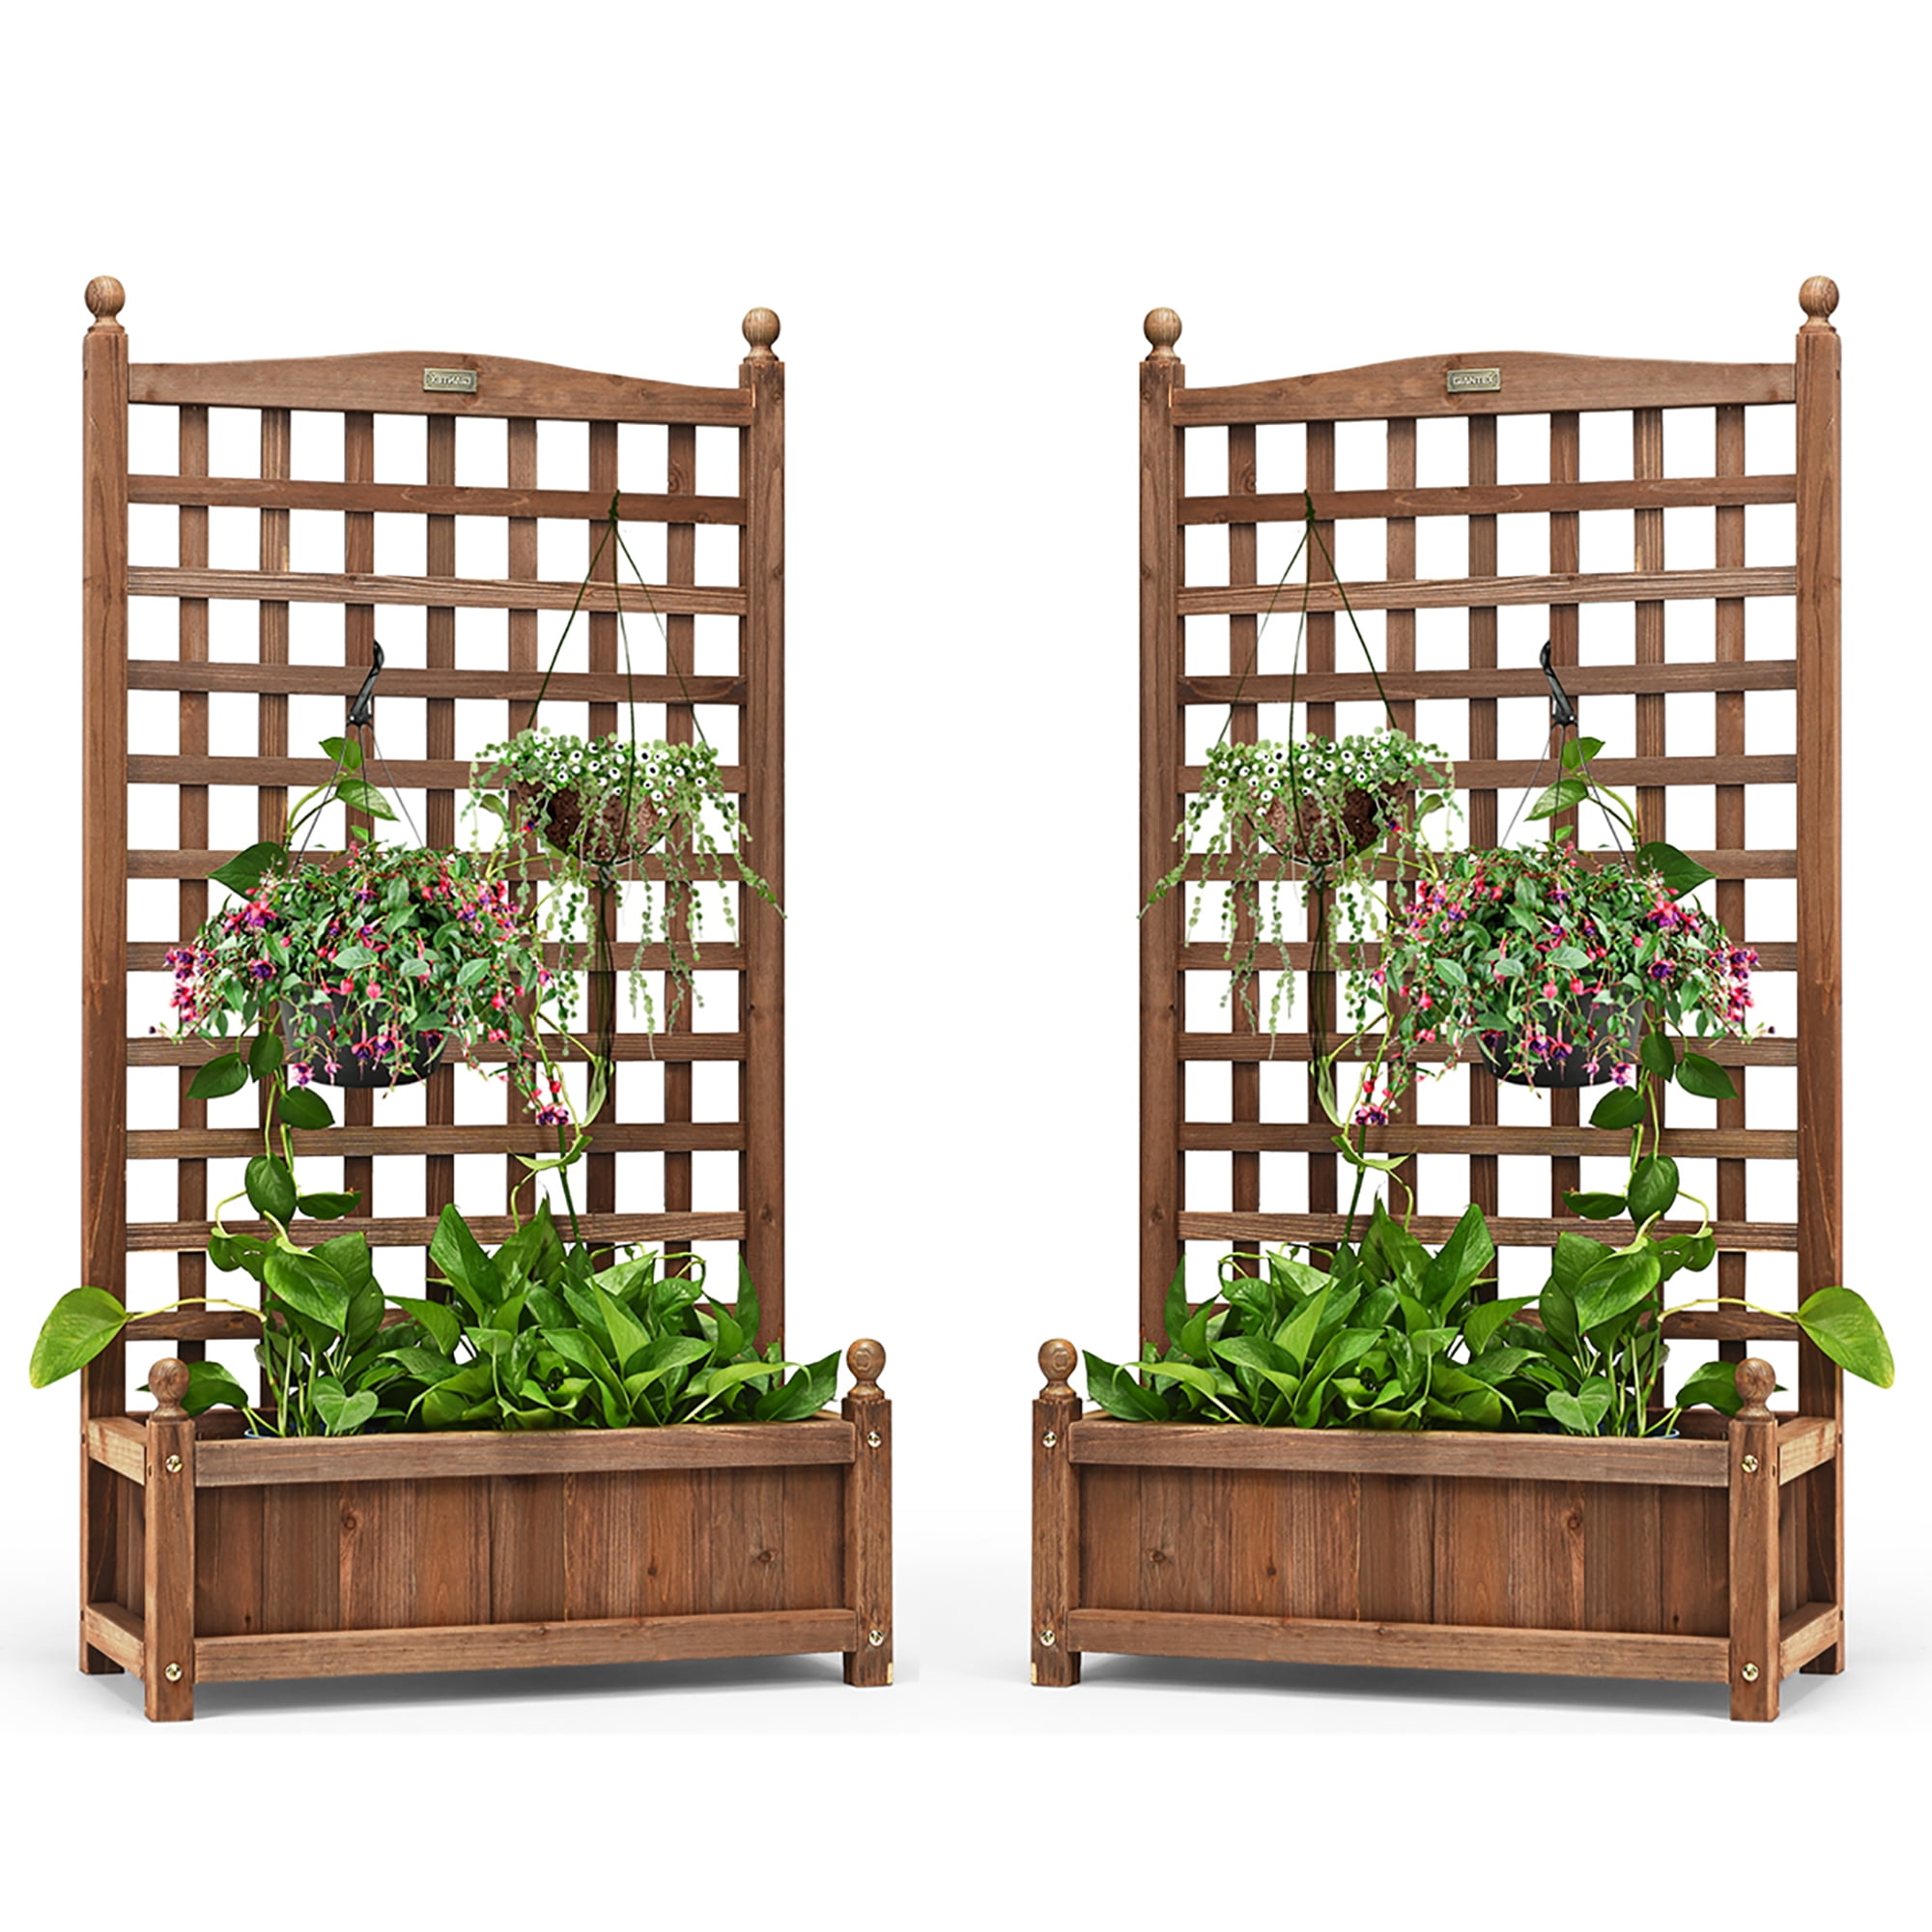 VIVOHOME Wood Planter Raised Bed with Trellis, 48 Inch Height Free 